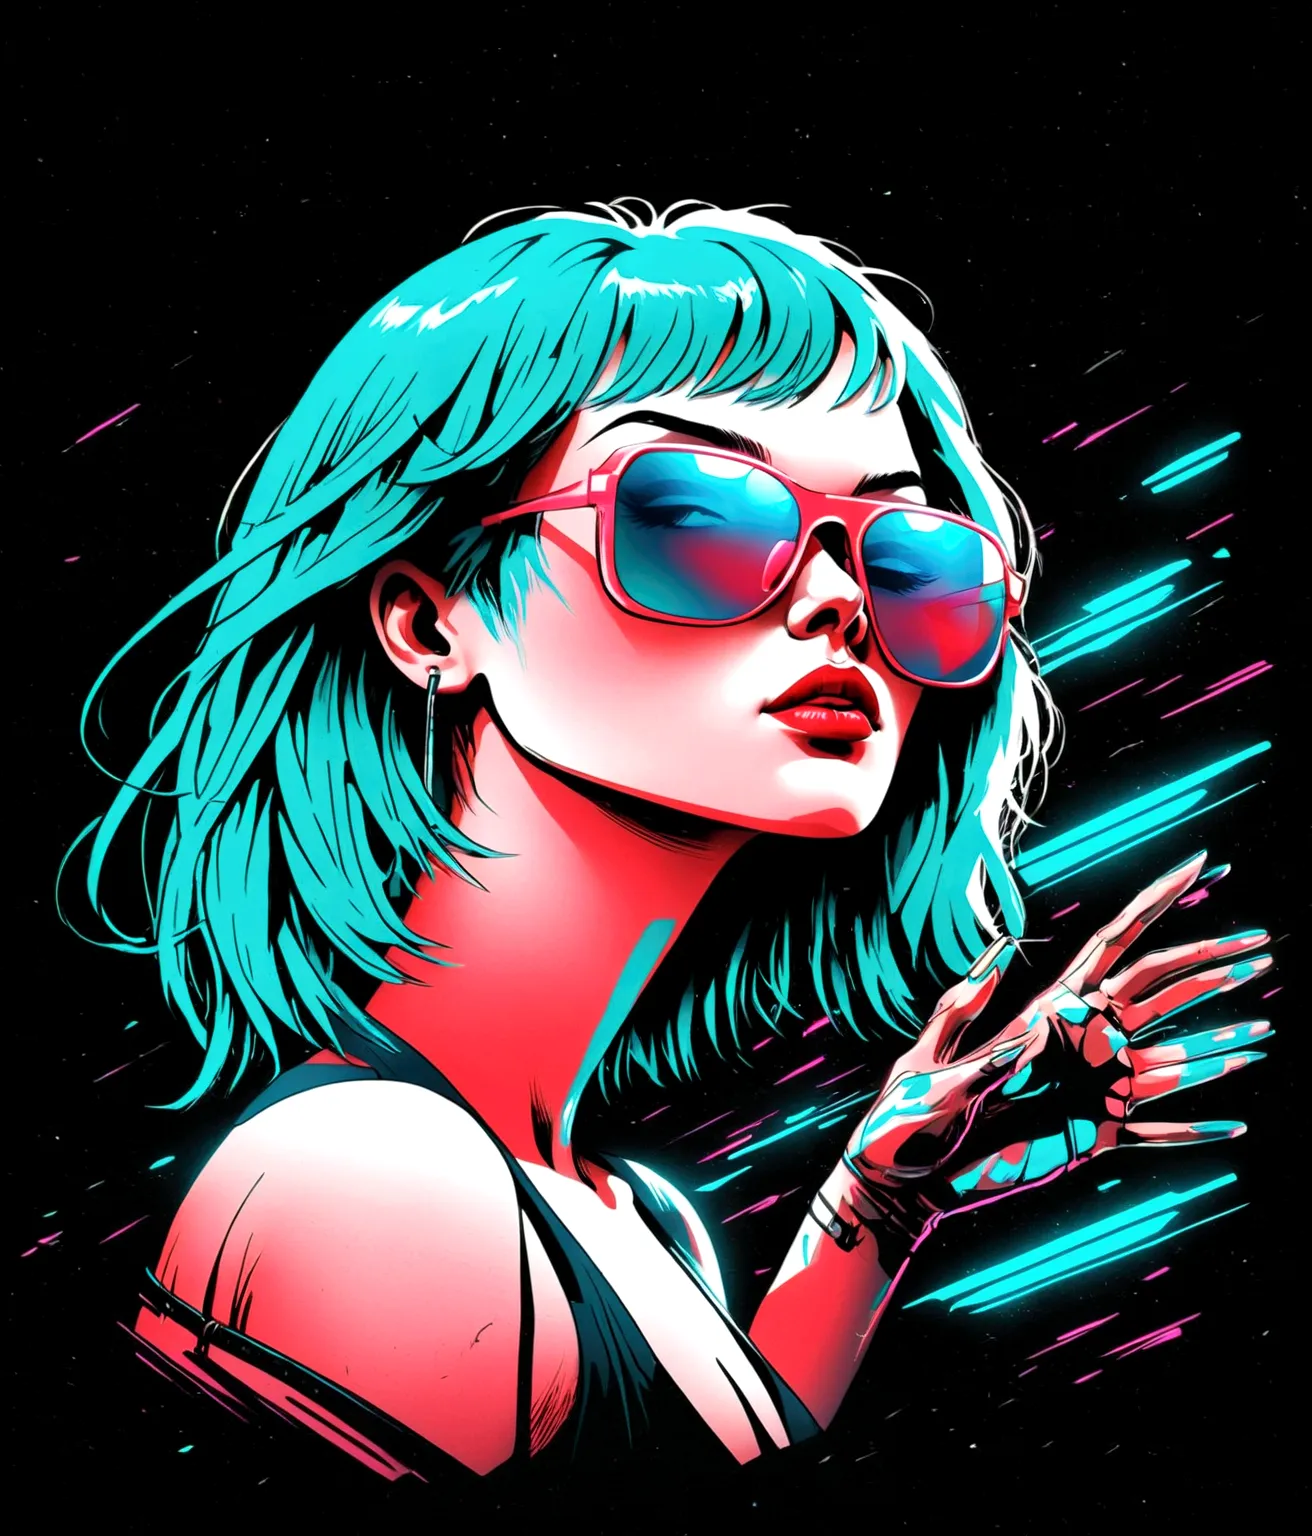 a woman with blue hair and sunglasses on her face, cyberpunk art by Liam Wong, tumblr, digital art, jen bartel, in style of digi...